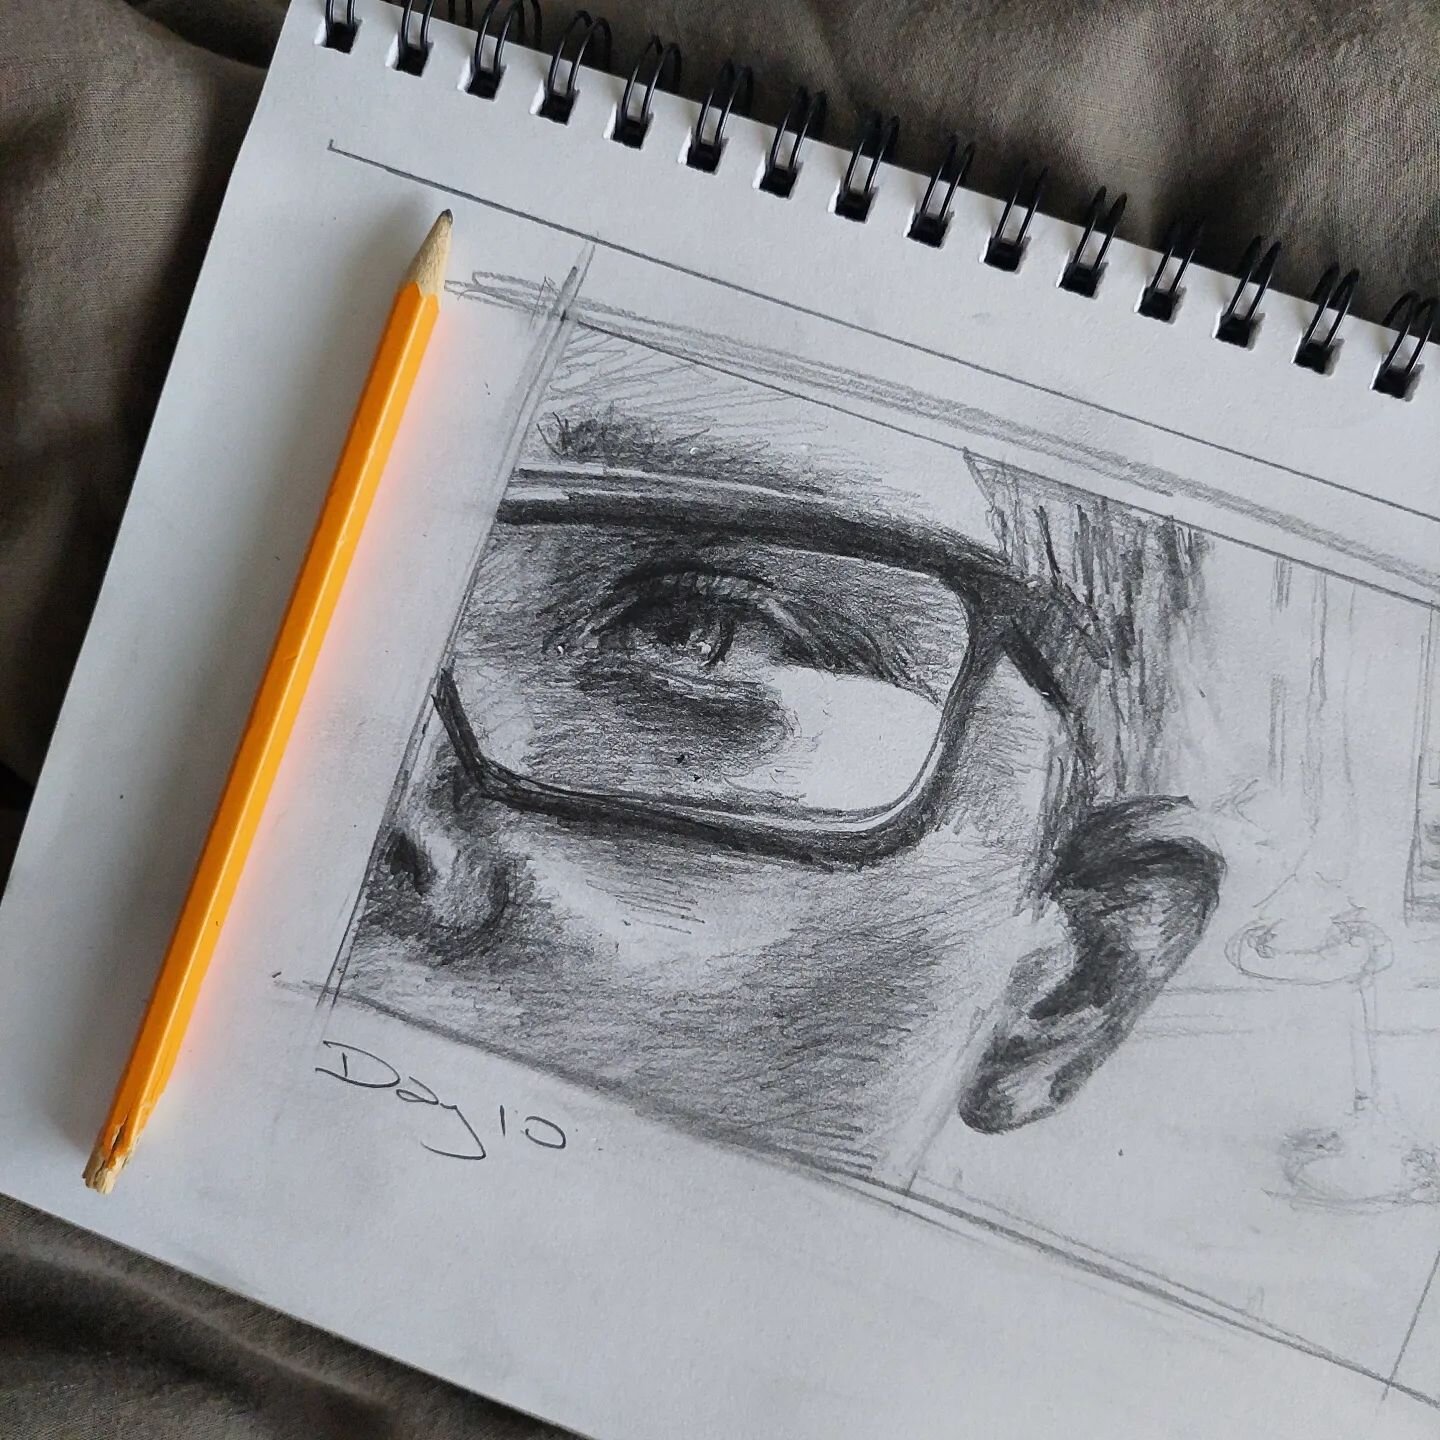 I've been wanting to sketch from this awesome image that my nephew took as a 'selfie' for ages. 🥰 
Day 10 of drawing/painting everyday. 

#31daysofcreativepractice2023 
#31daysofcreativitepactice 
#sketch #selfiesketch